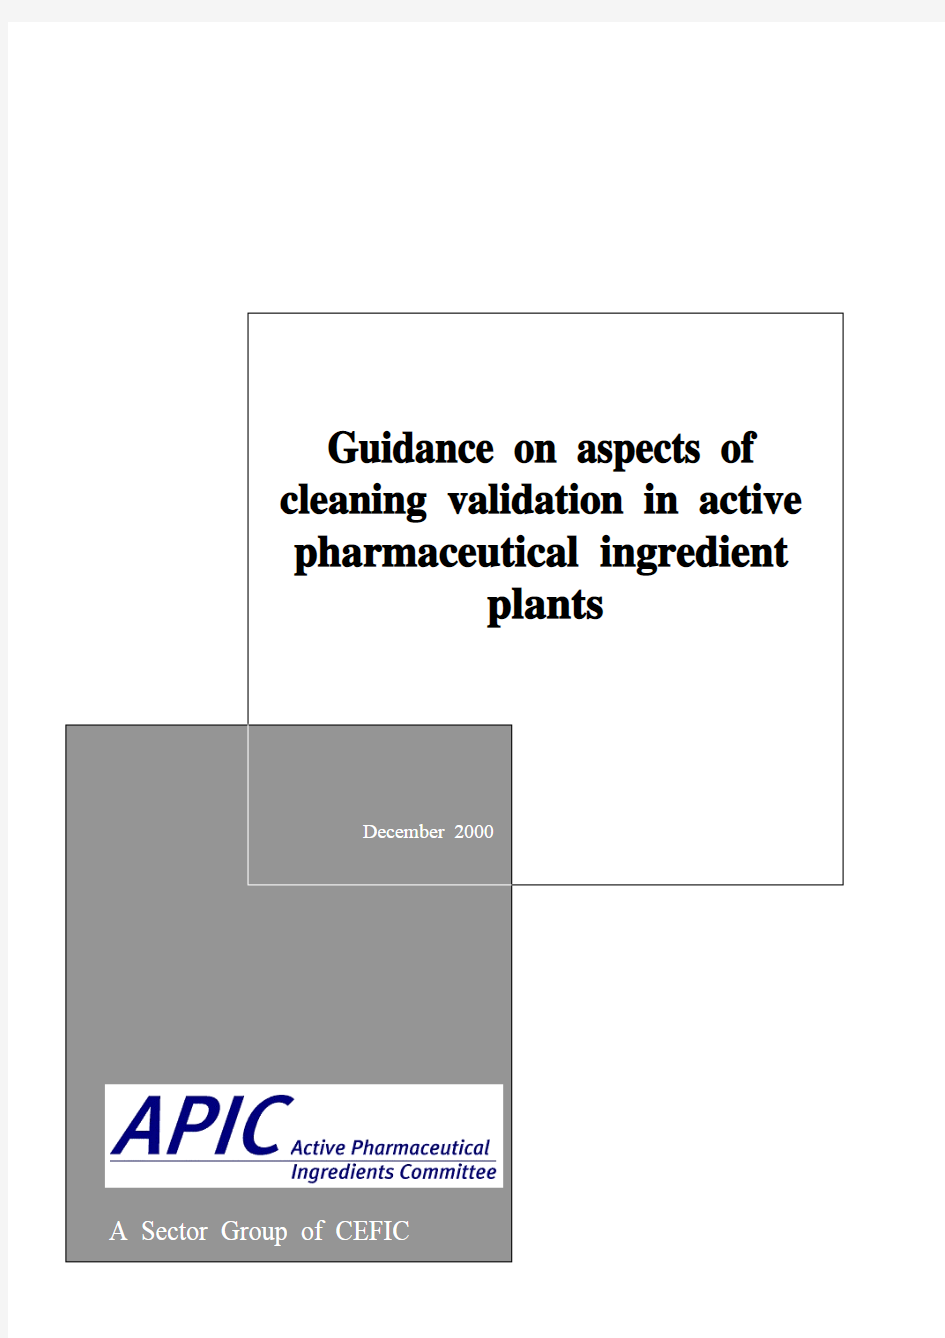 Guidance on aspects of cleaning validation in active pharmaceutical ingredient plants